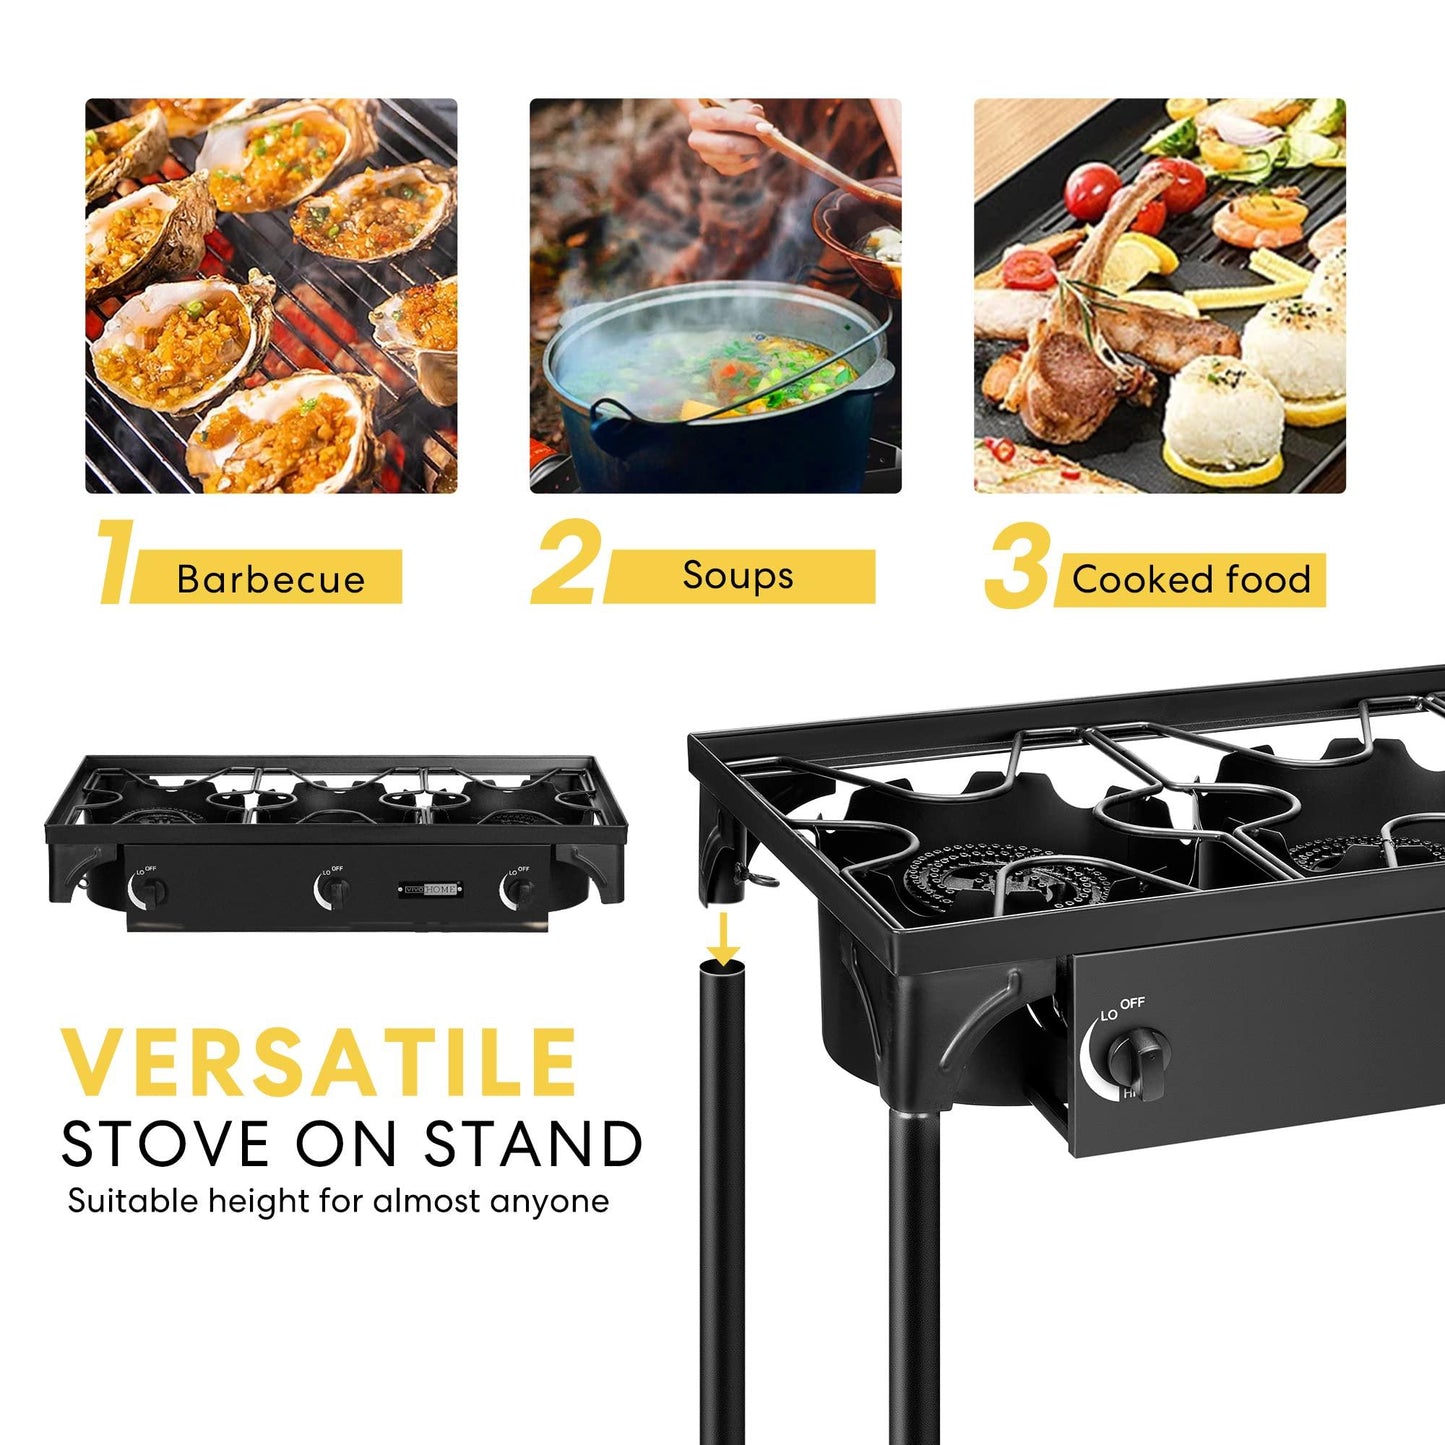 VIVOHOME Outdoor 3-Burner Stove, Max. 225,000 BTU/hr, Heavy Duty Tri-Propane Cooker with Detachable Legs Stand for Camping Cookout - CookCave